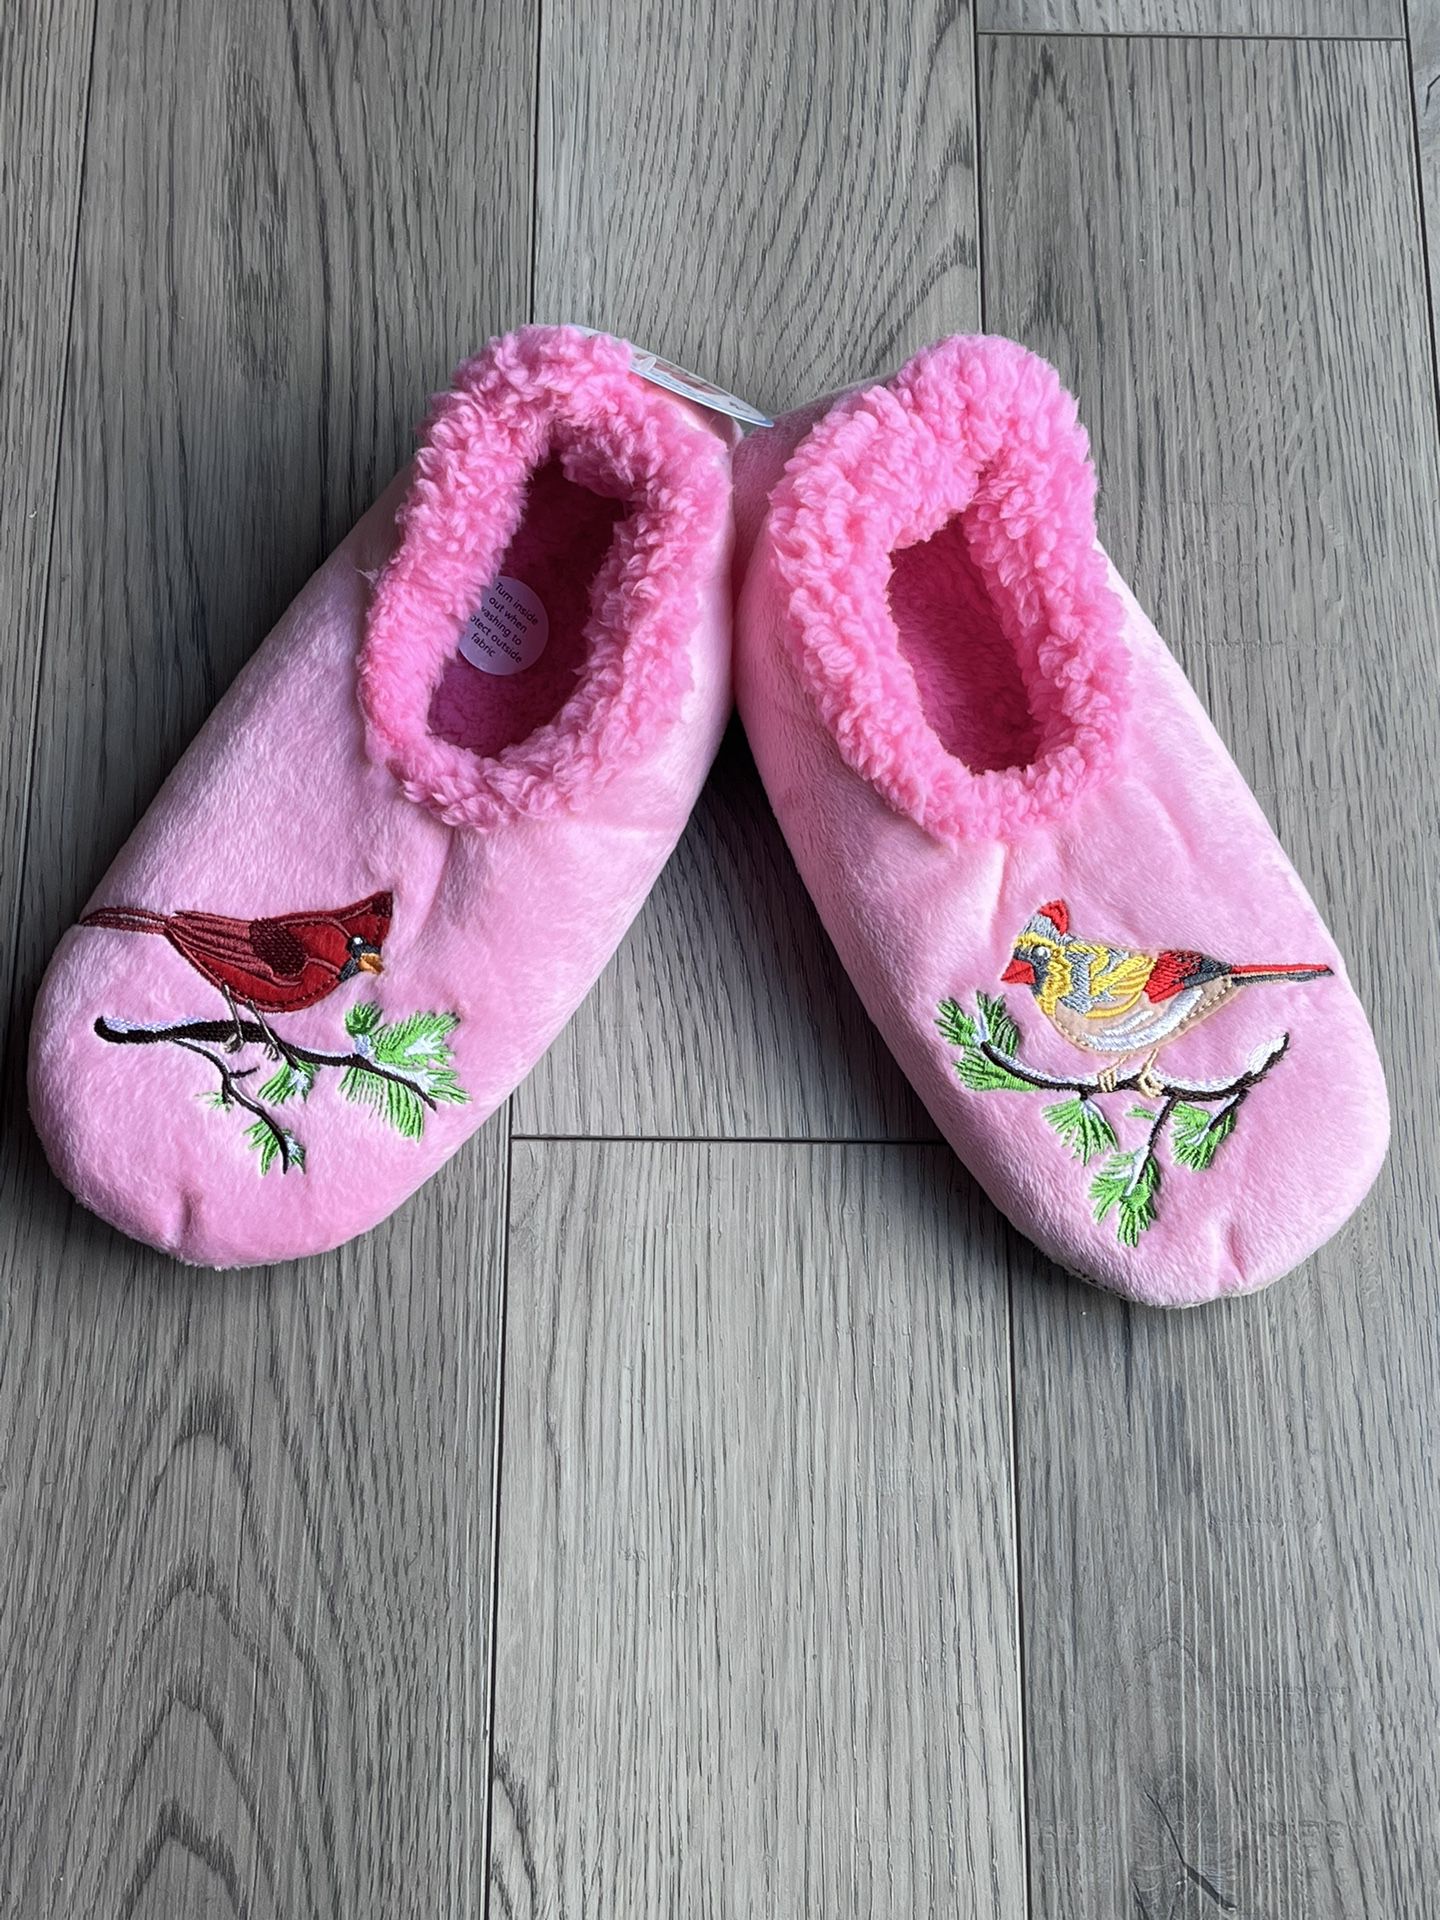 NEW-Snoozie Slippers Size M 7/8